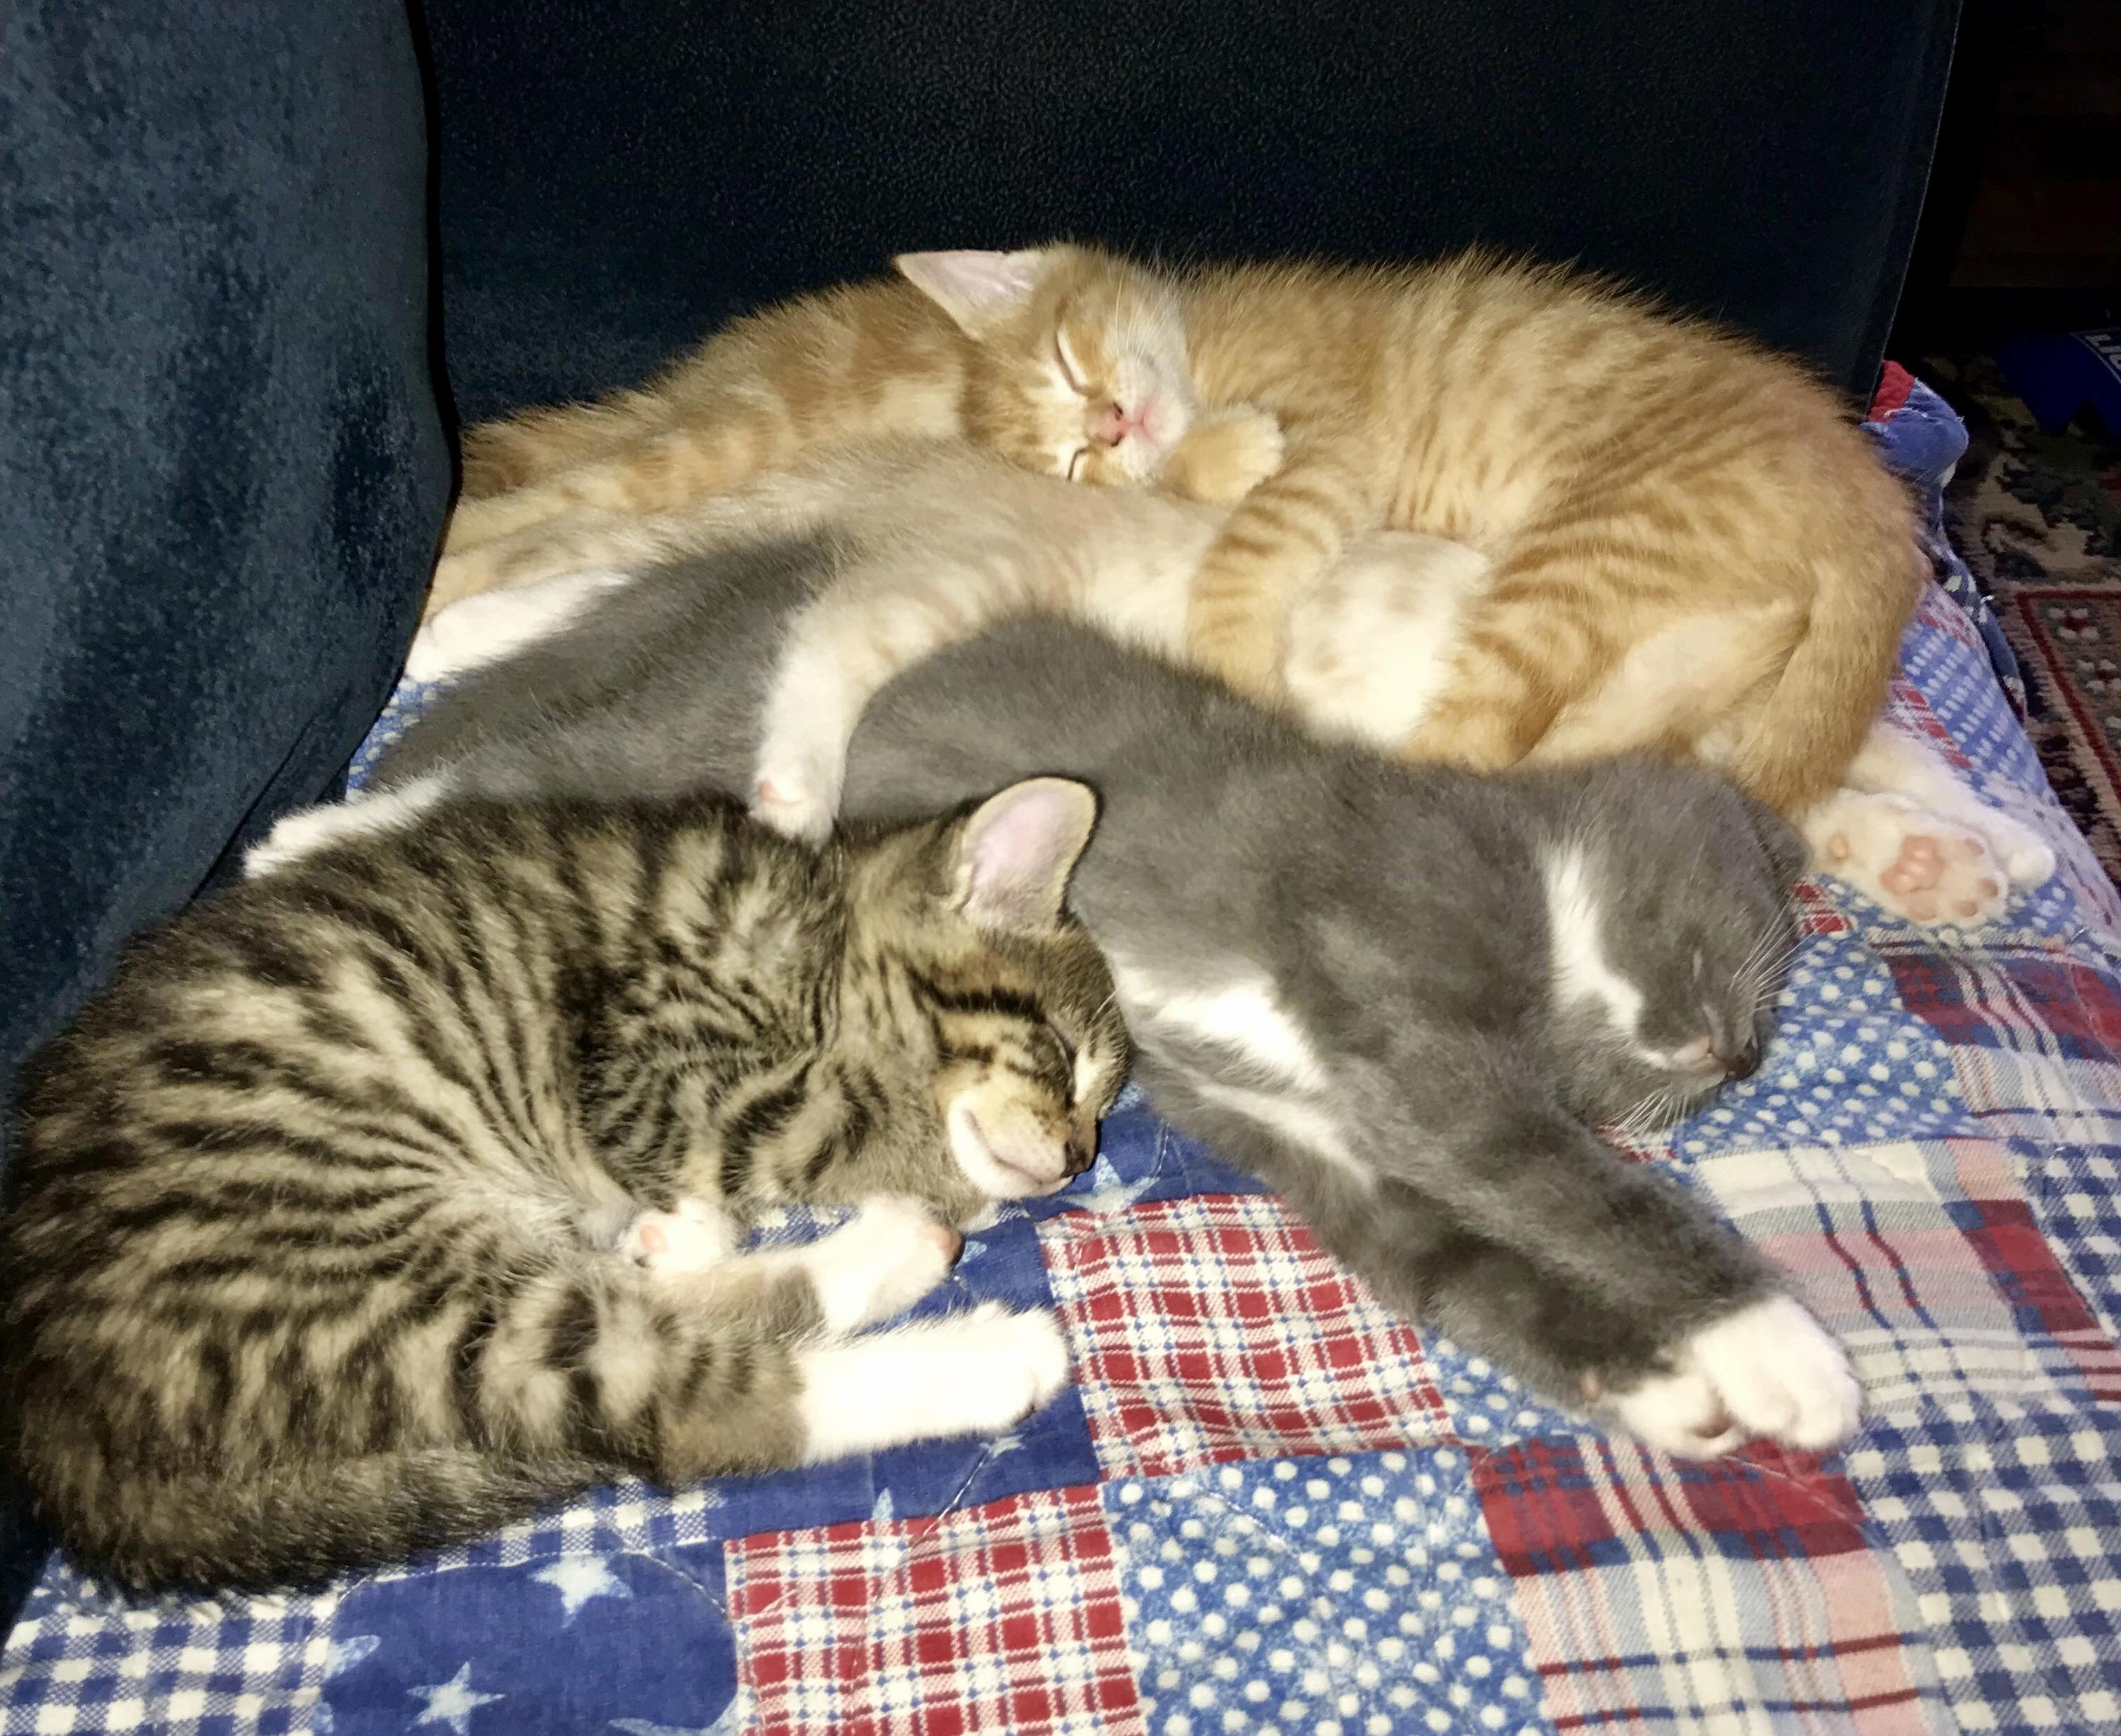 How many kittens can you spot in this floof